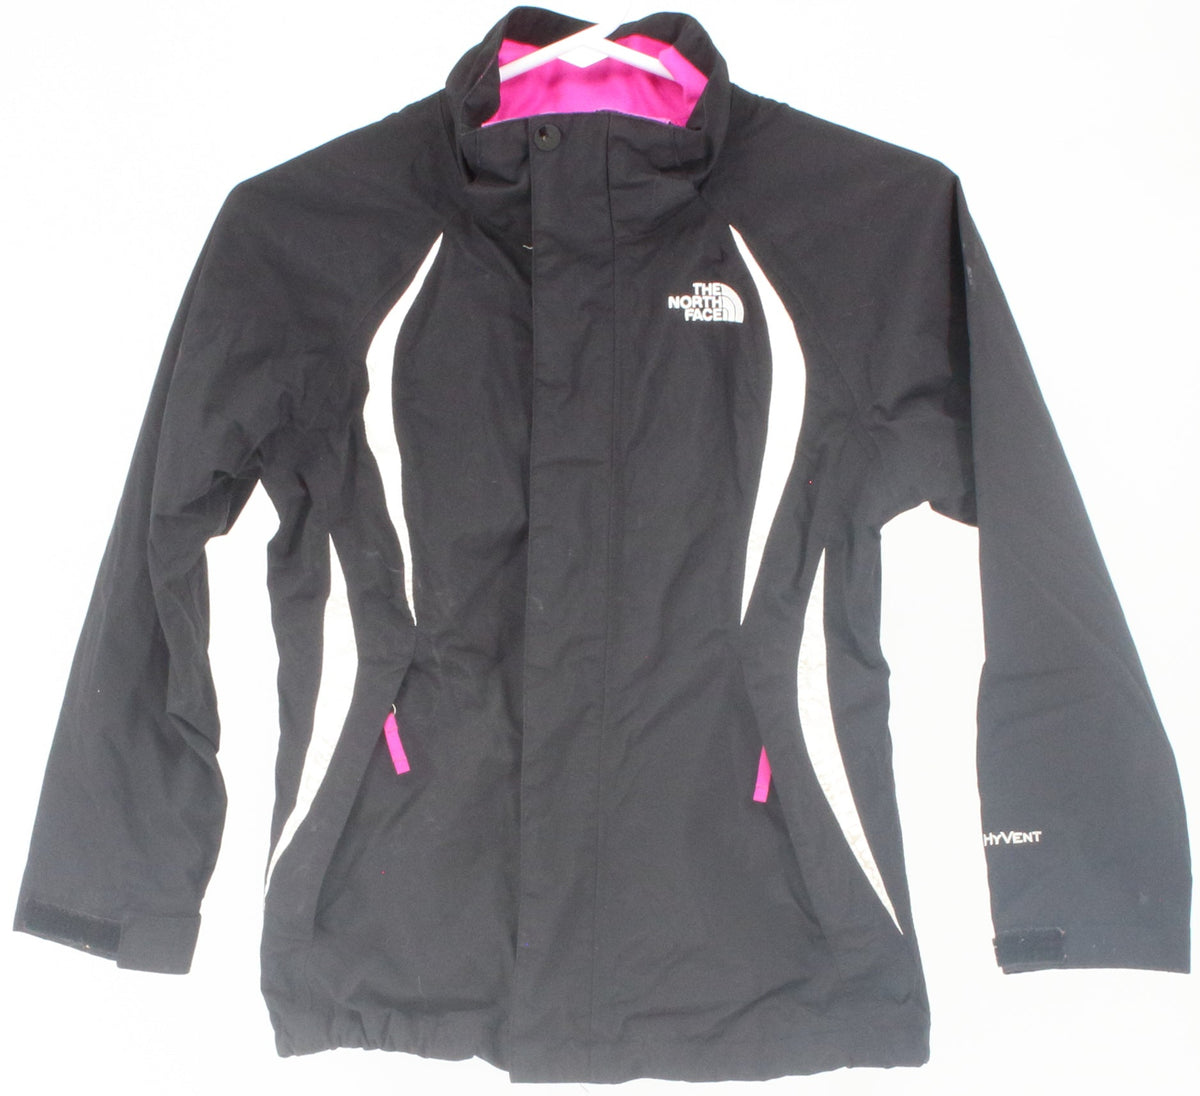 The North Face HyVent Black Pink and White Children's Jacket